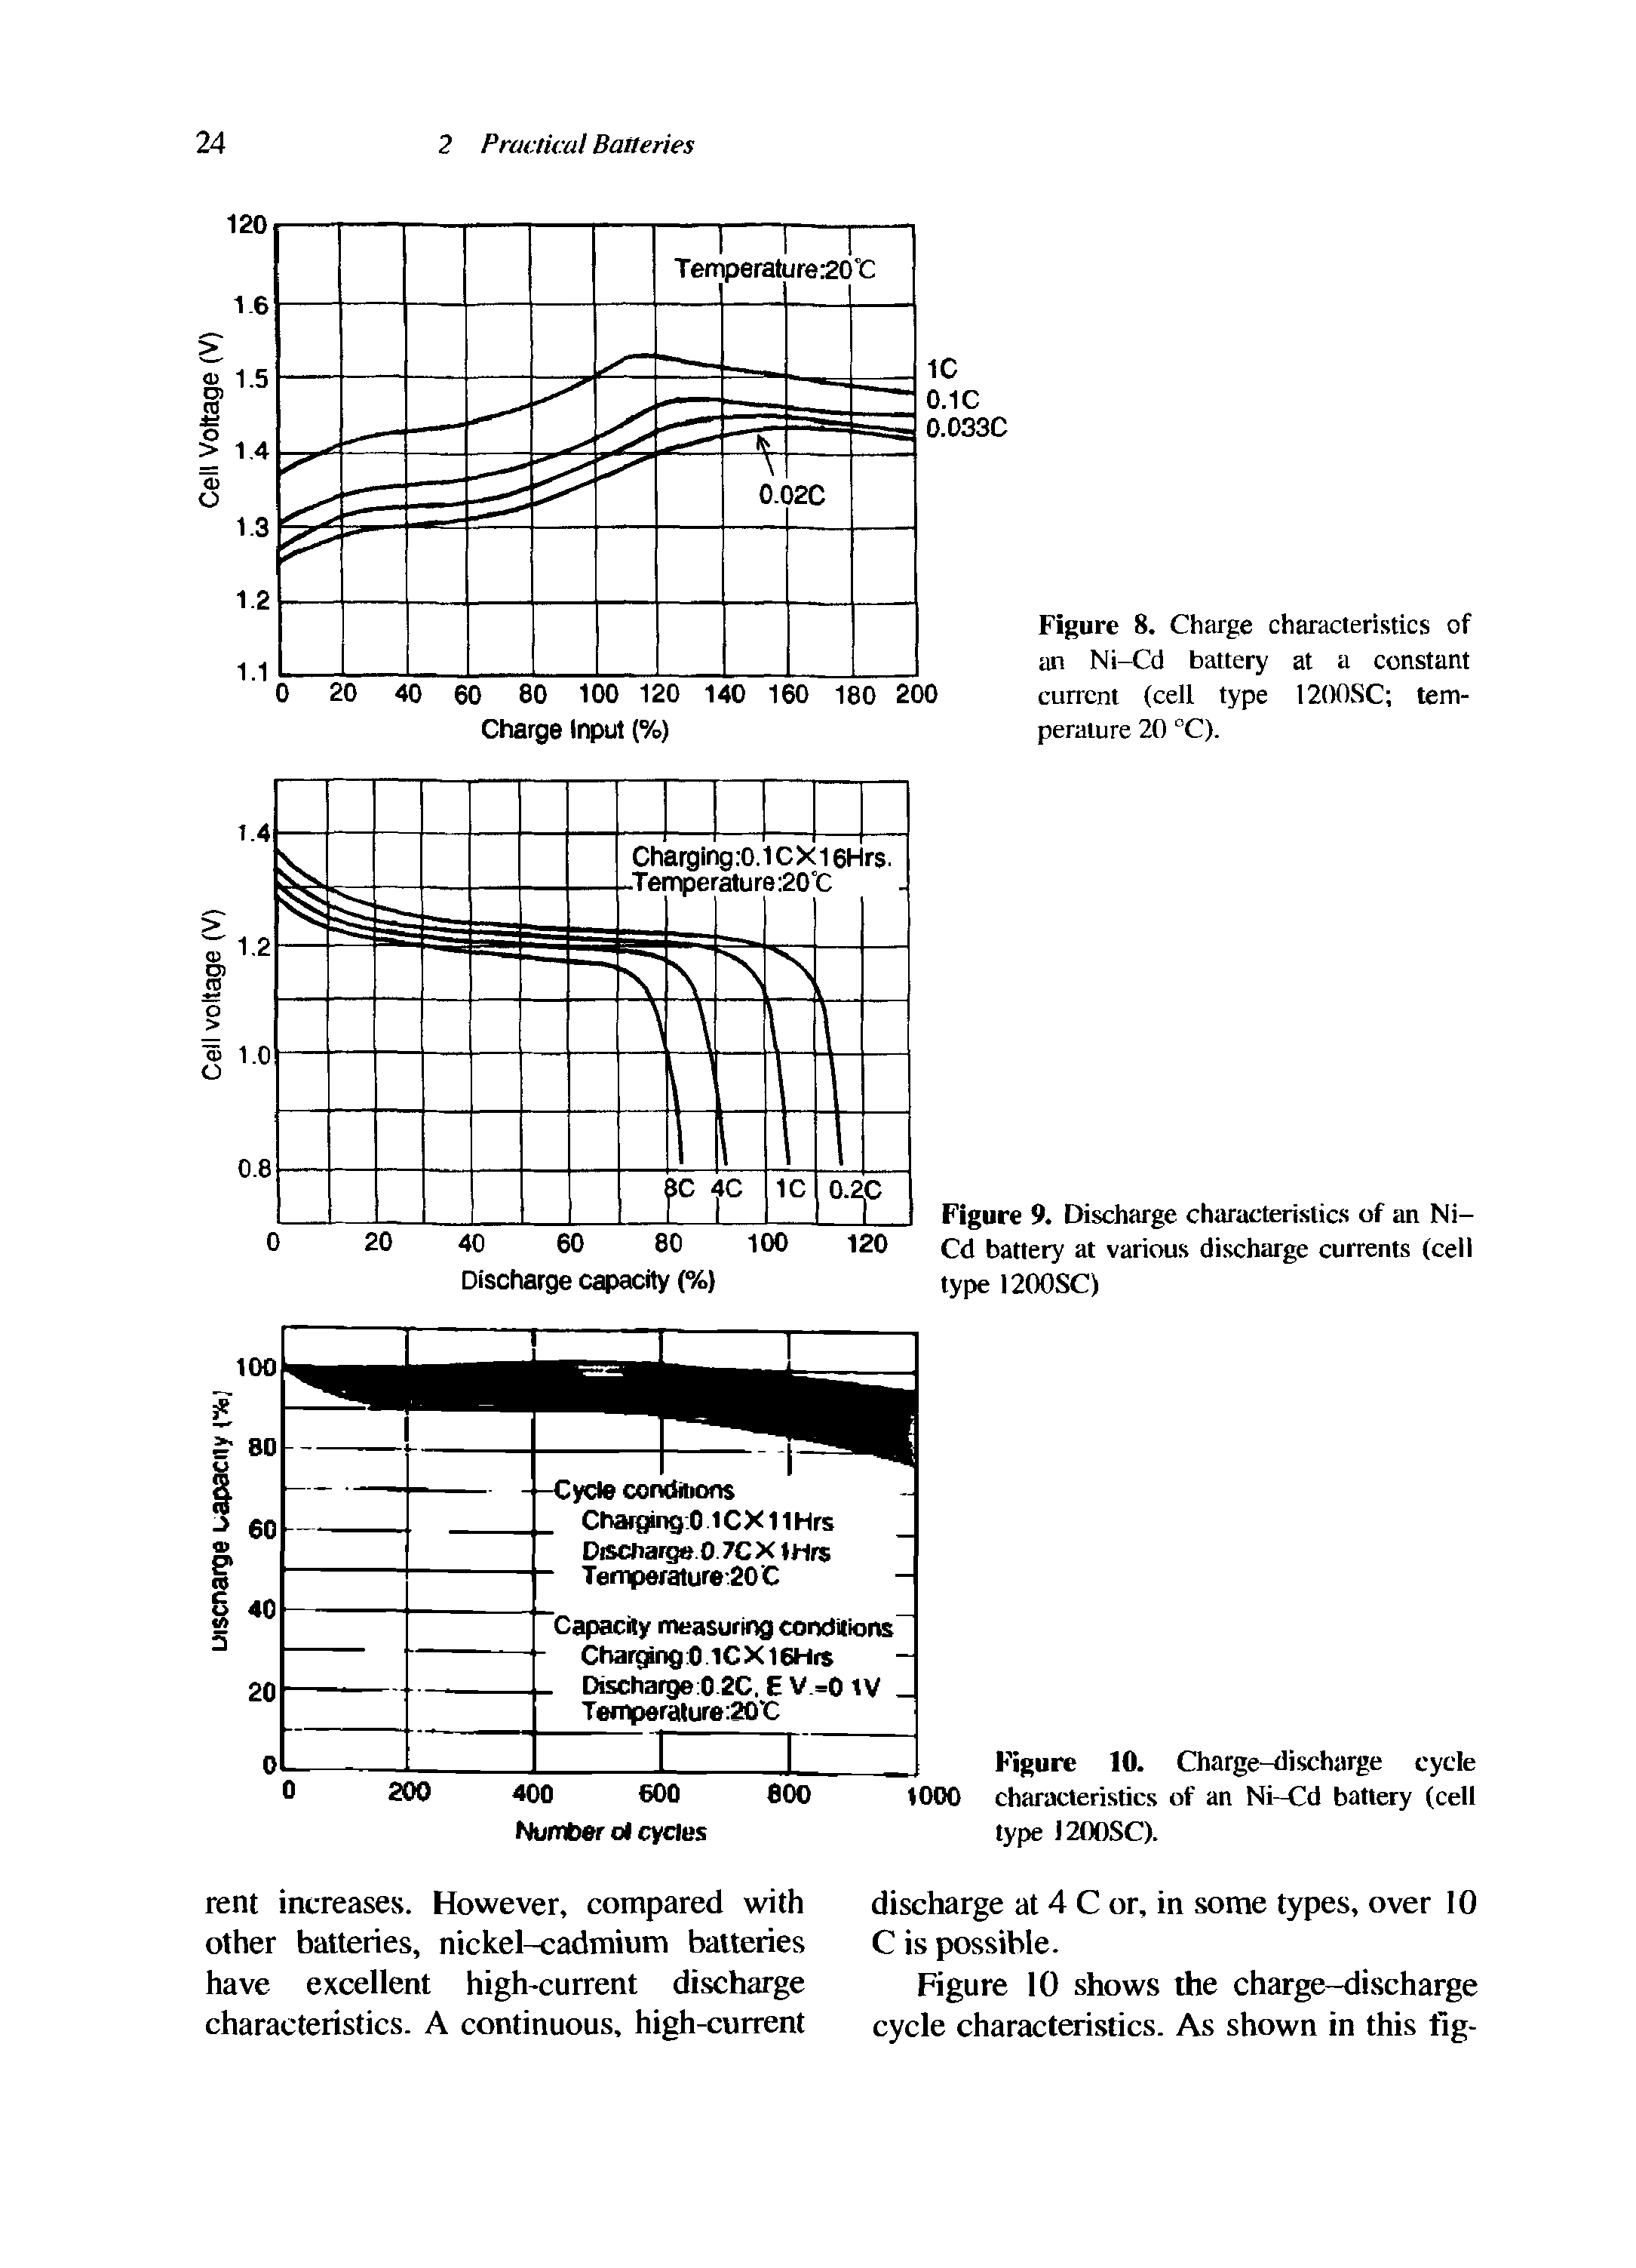 Figure 8. Charge characteristics of an Ni-Cd battery at a constant current (cell type 1200SC temperature 20 °C).